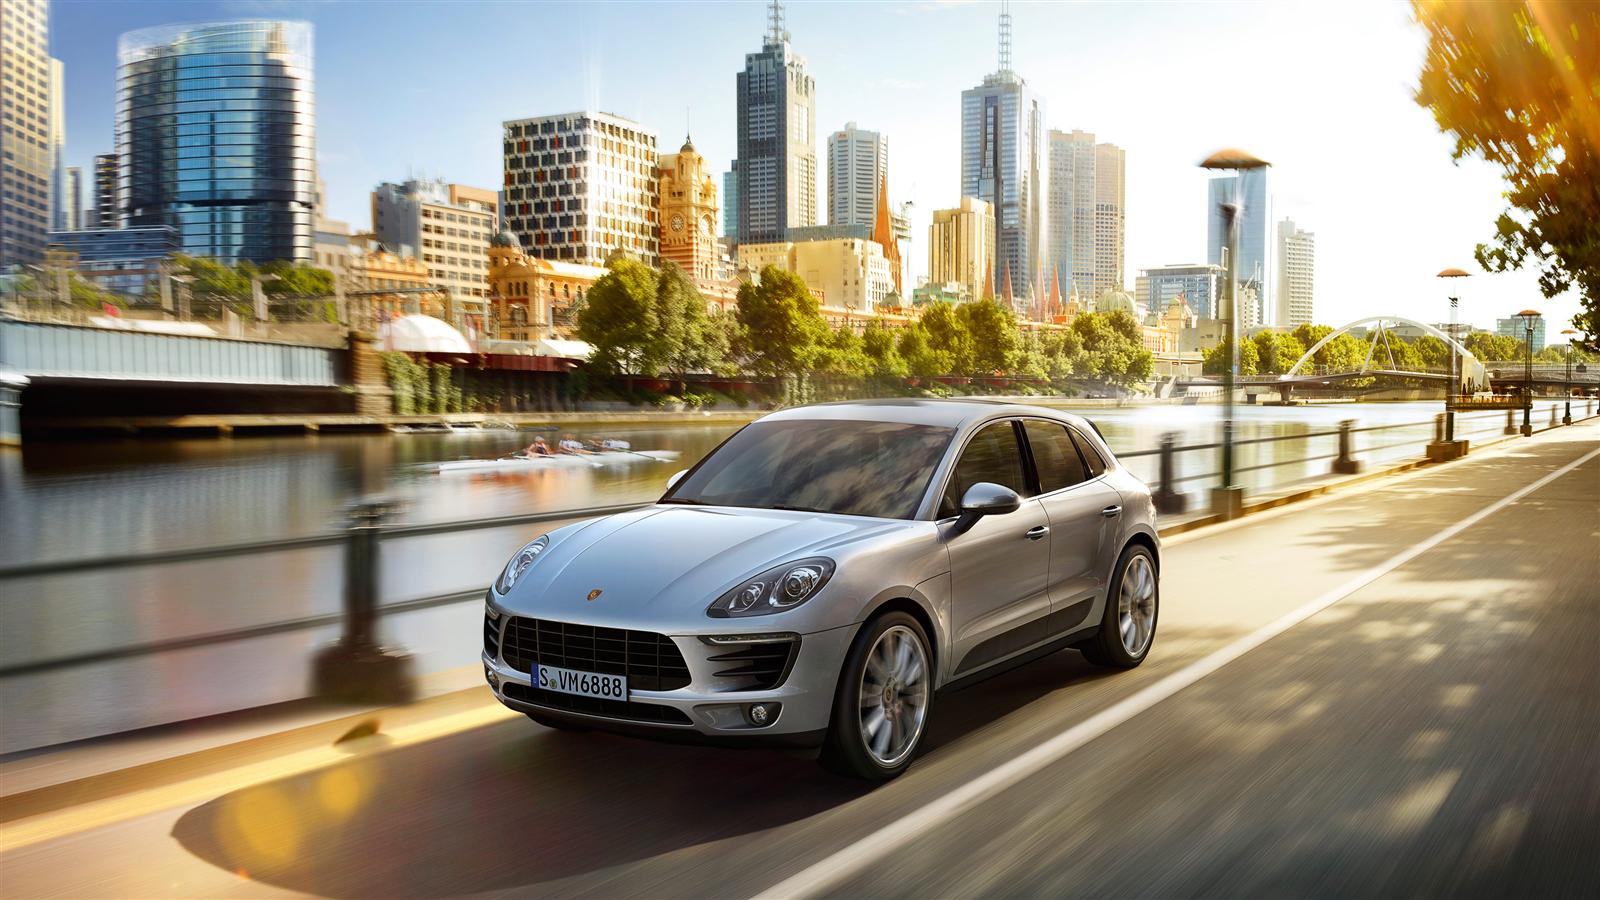 Porsche Macan 2.0L Petrol Launched in India at INR 97.71 lakh